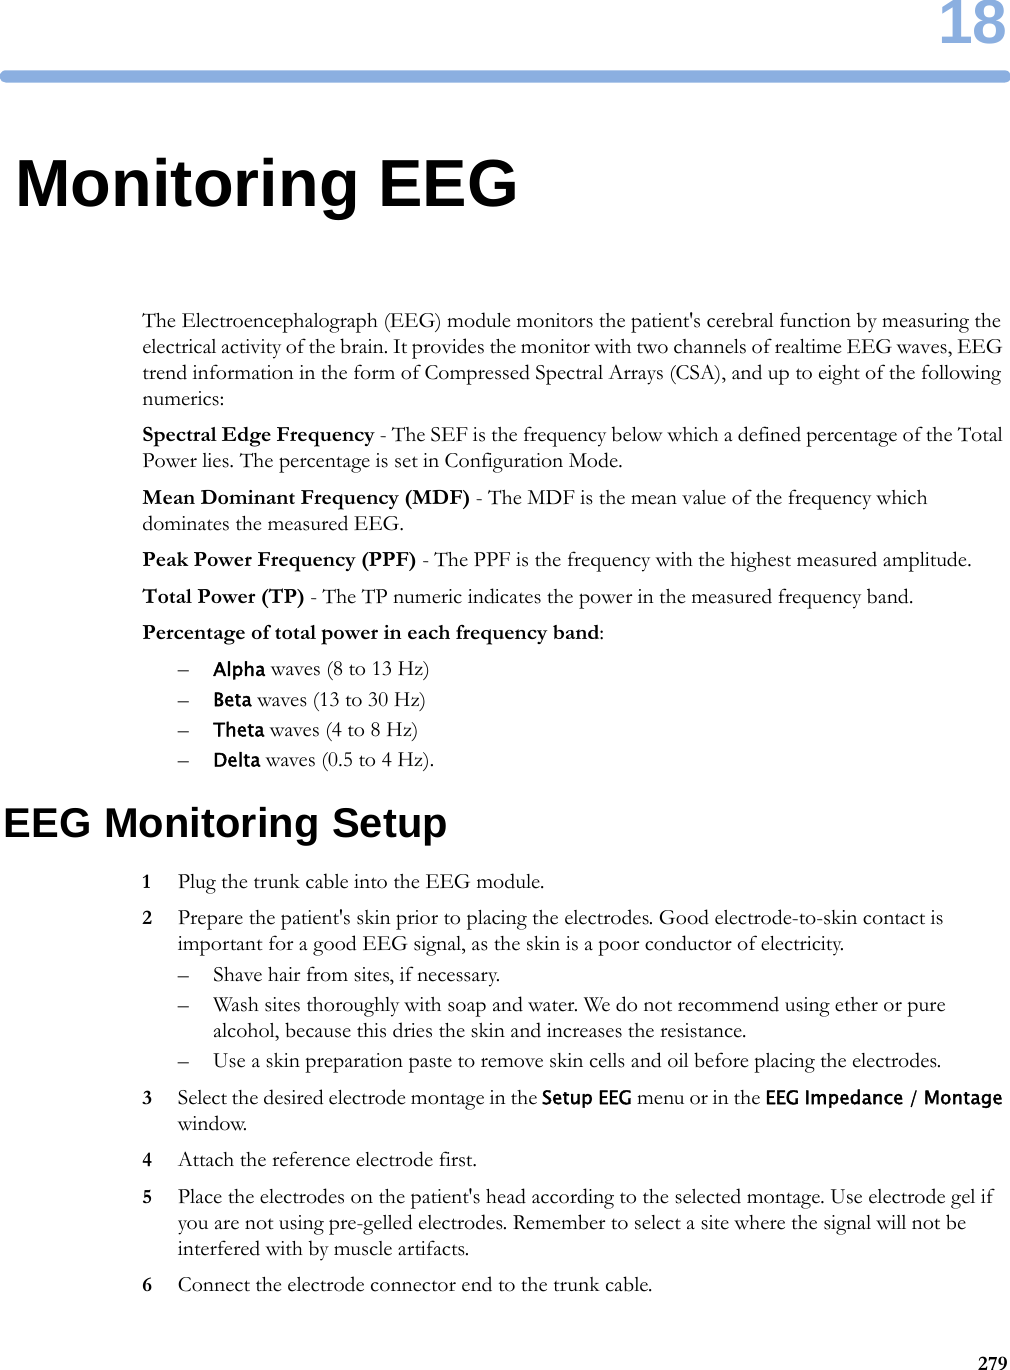 1827918Monitoring EEGThe Electroencephalograph (EEG) module monitors the patient&apos;s cerebral function by measuring the electrical activity of the brain. It provides the monitor with two channels of realtime EEG waves, EEG trend information in the form of Compressed Spectral Arrays (CSA), and up to eight of the following numerics:Spectral Edge Frequency - The SEF is the frequency below which a defined percentage of the Total Power lies. The percentage is set in Configuration Mode.Mean Dominant Frequency (MDF) - The MDF is the mean value of the frequency which dominates the measured EEG.Peak Power Frequency (PPF) - The PPF is the frequency with the highest measured amplitude.Total Power (TP) - The TP numeric indicates the power in the measured frequency band.Percentage of total power in each frequency band:–Alpha waves (8 to 13 Hz)–Beta waves (13 to 30 Hz)–Theta waves (4 to 8 Hz)–Delta waves (0.5 to 4 Hz).EEG Monitoring Setup1Plug the trunk cable into the EEG module.2Prepare the patient&apos;s skin prior to placing the electrodes. Good electrode-to-skin contact is important for a good EEG signal, as the skin is a poor conductor of electricity.– Shave hair from sites, if necessary.– Wash sites thoroughly with soap and water. We do not recommend using ether or pure alcohol, because this dries the skin and increases the resistance.– Use a skin preparation paste to remove skin cells and oil before placing the electrodes.3Select the desired electrode montage in the Setup EEG menu or in the EEG Impedance / Montage window.4Attach the reference electrode first.5Place the electrodes on the patient&apos;s head according to the selected montage. Use electrode gel if you are not using pre-gelled electrodes. Remember to select a site where the signal will not be interfered with by muscle artifacts.6Connect the electrode connector end to the trunk cable.